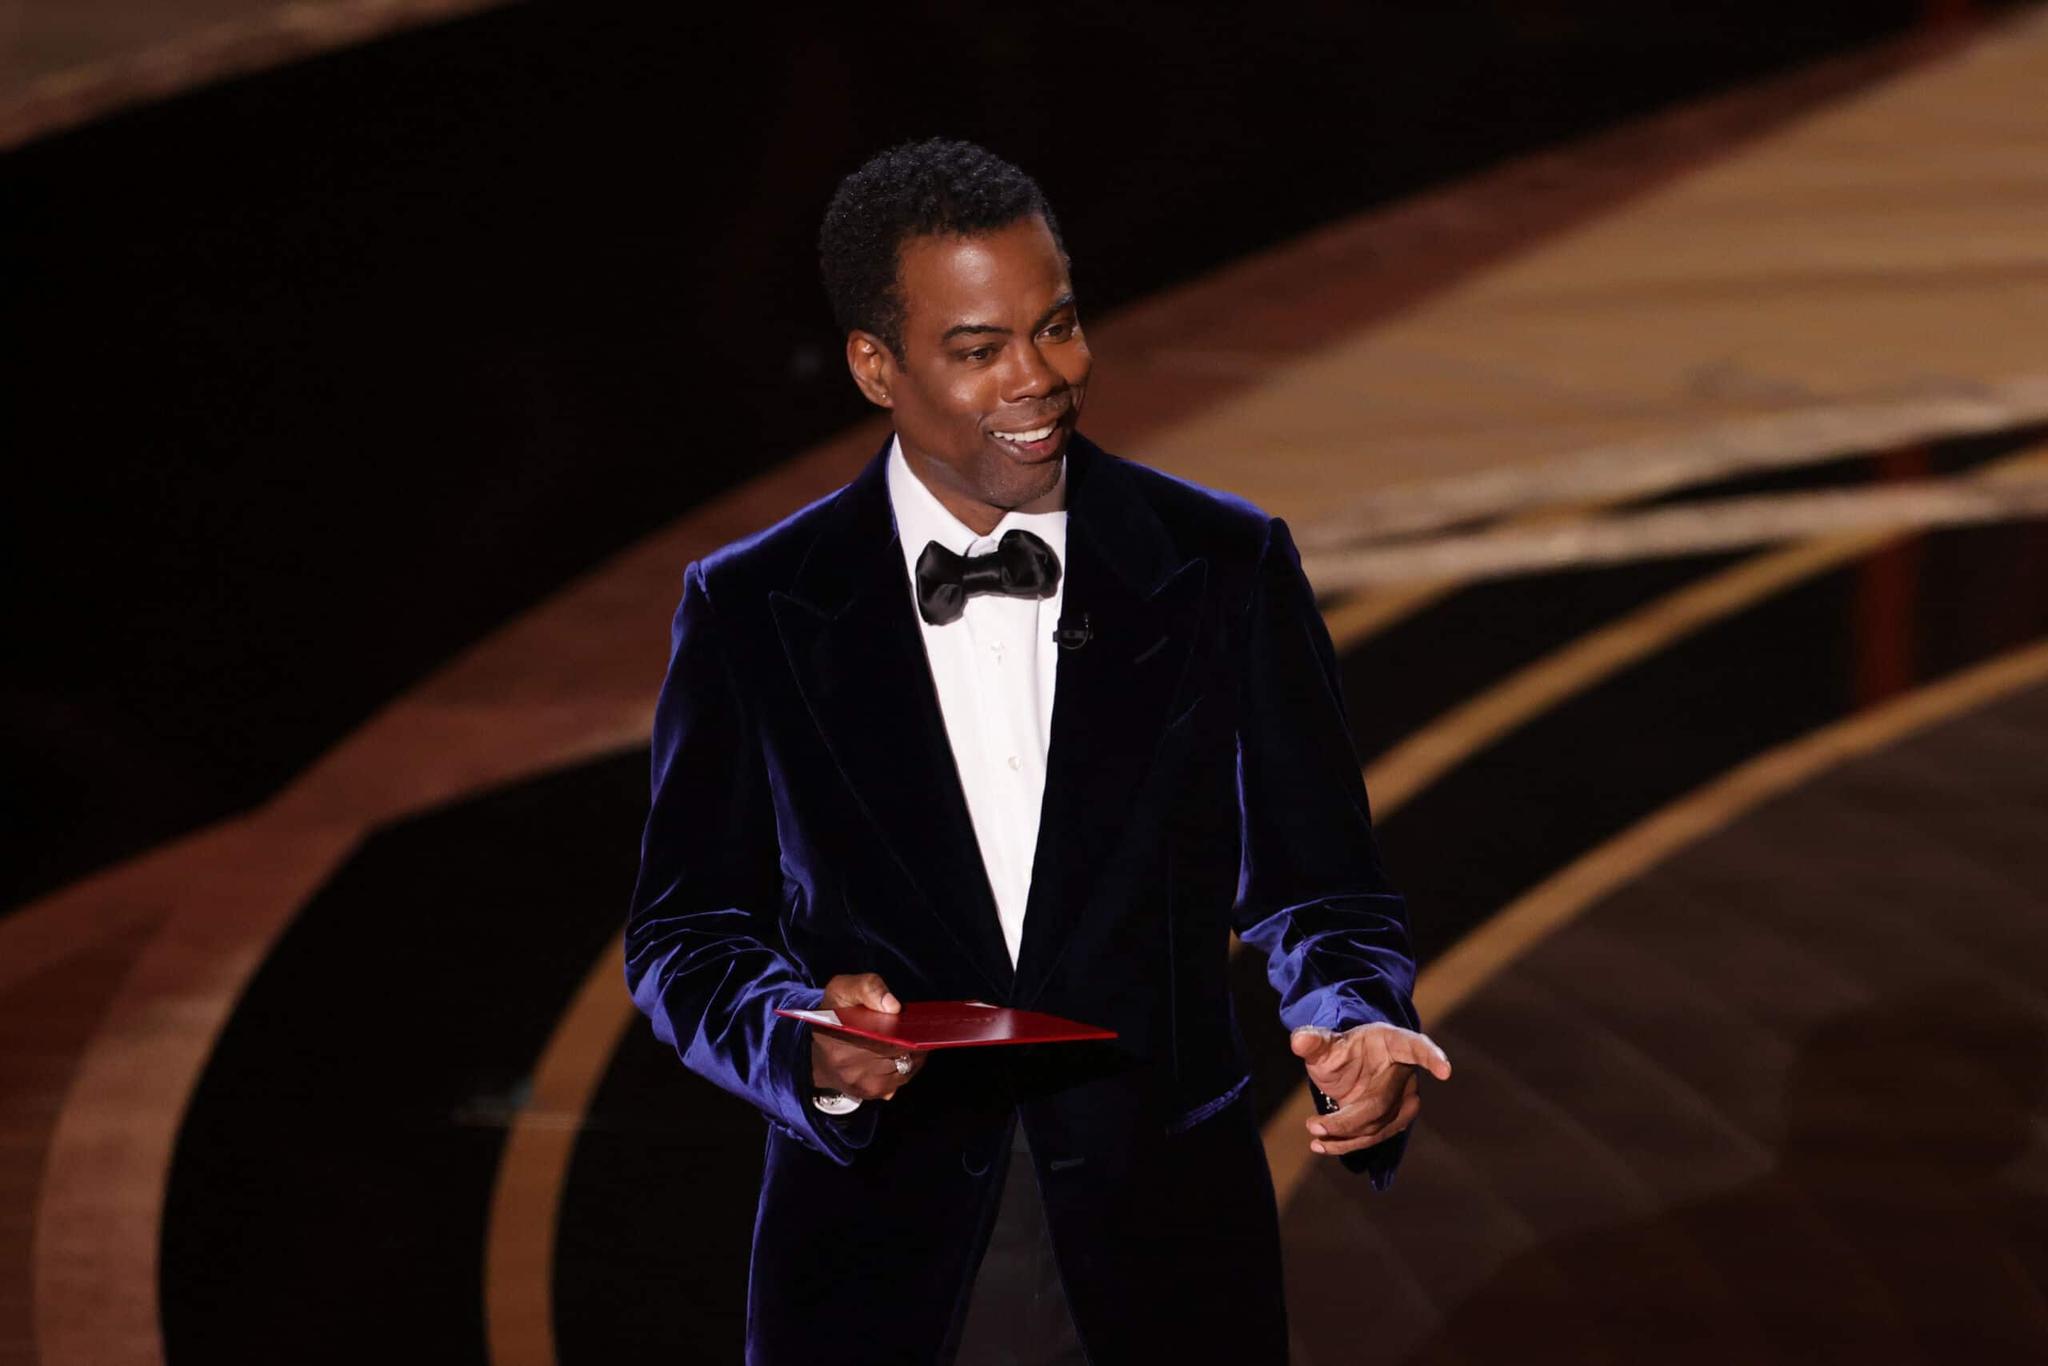 Chris Rock Reportedly 'Frustrated' About Jada Pinkett Smith's Drama